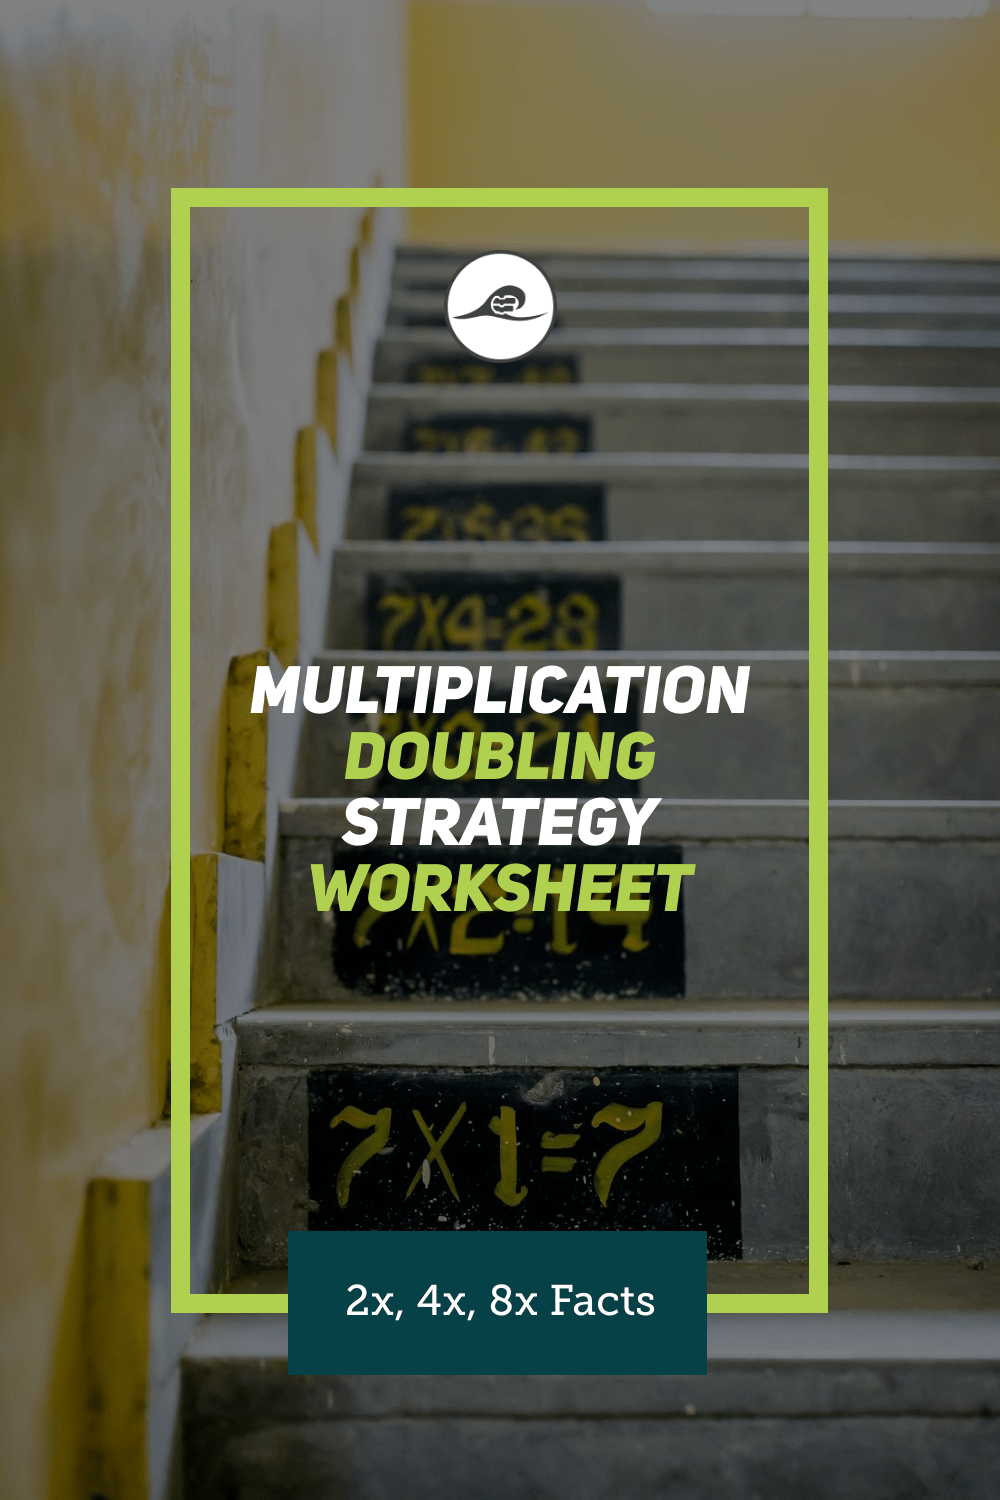 Doubling Multiplication Strategy Worksheets 4x